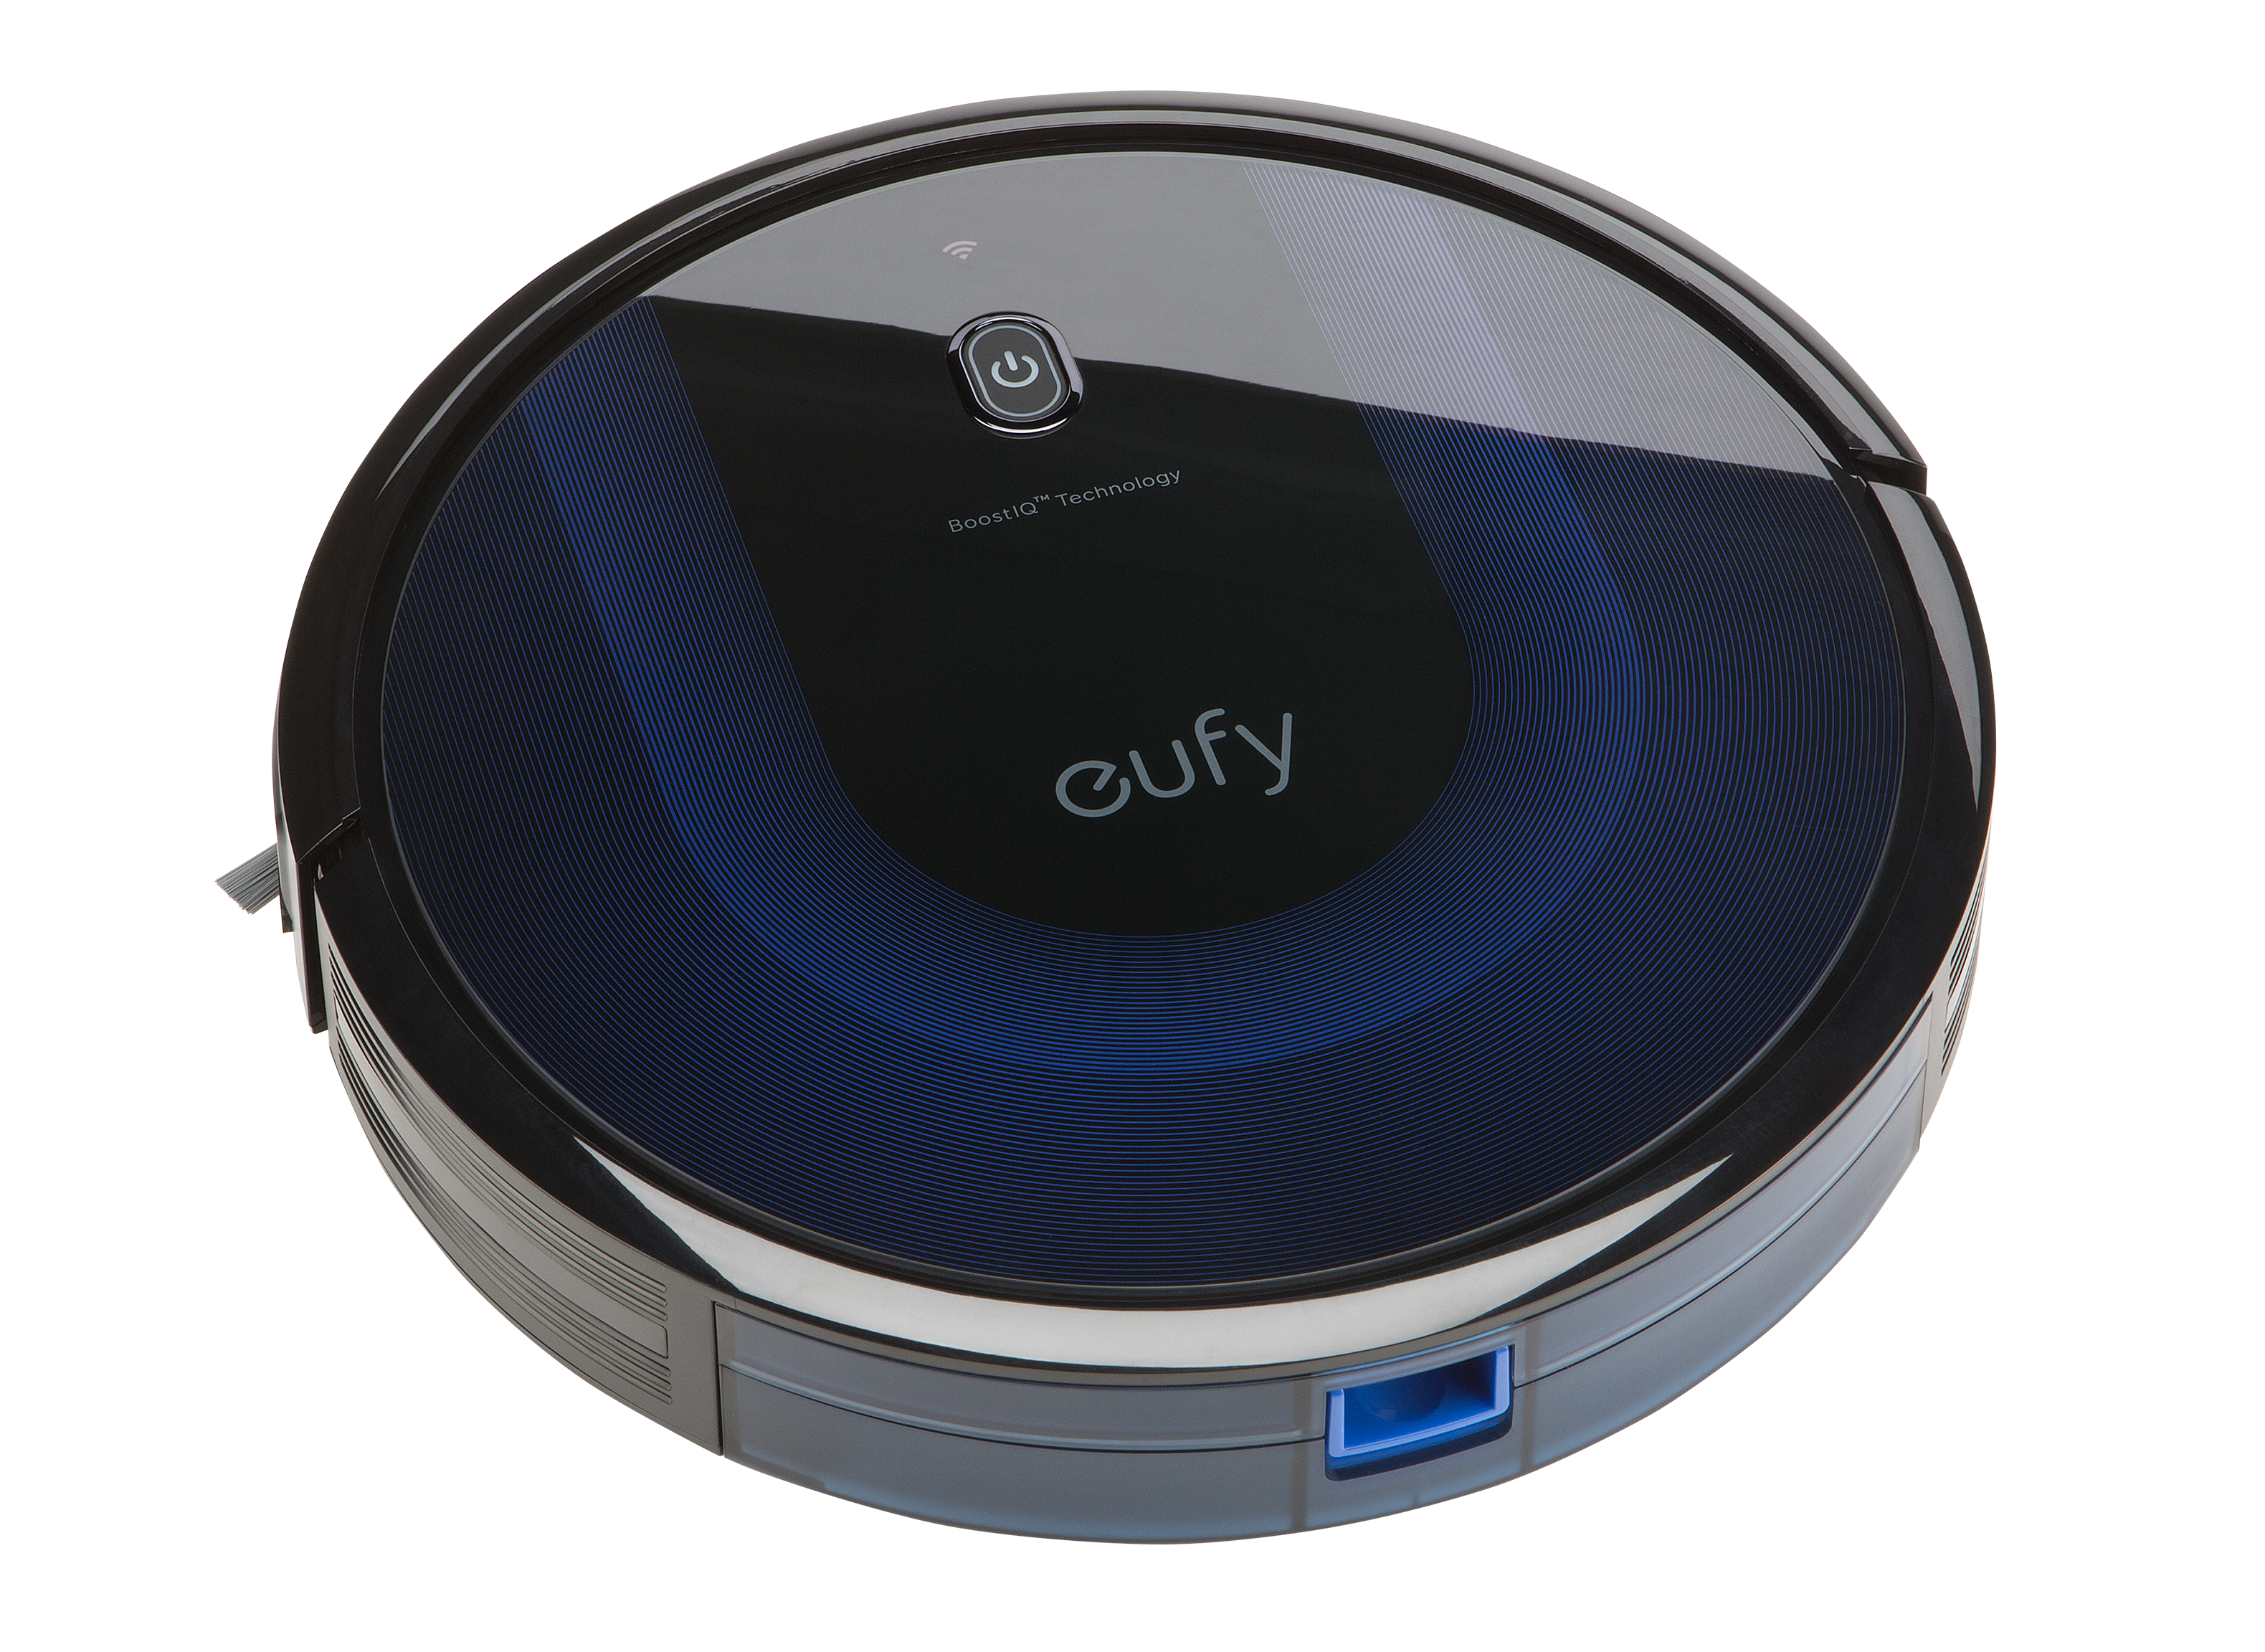 Eufy RoboVac 15C Max Vacuum Cleaner Review - Consumer Reports